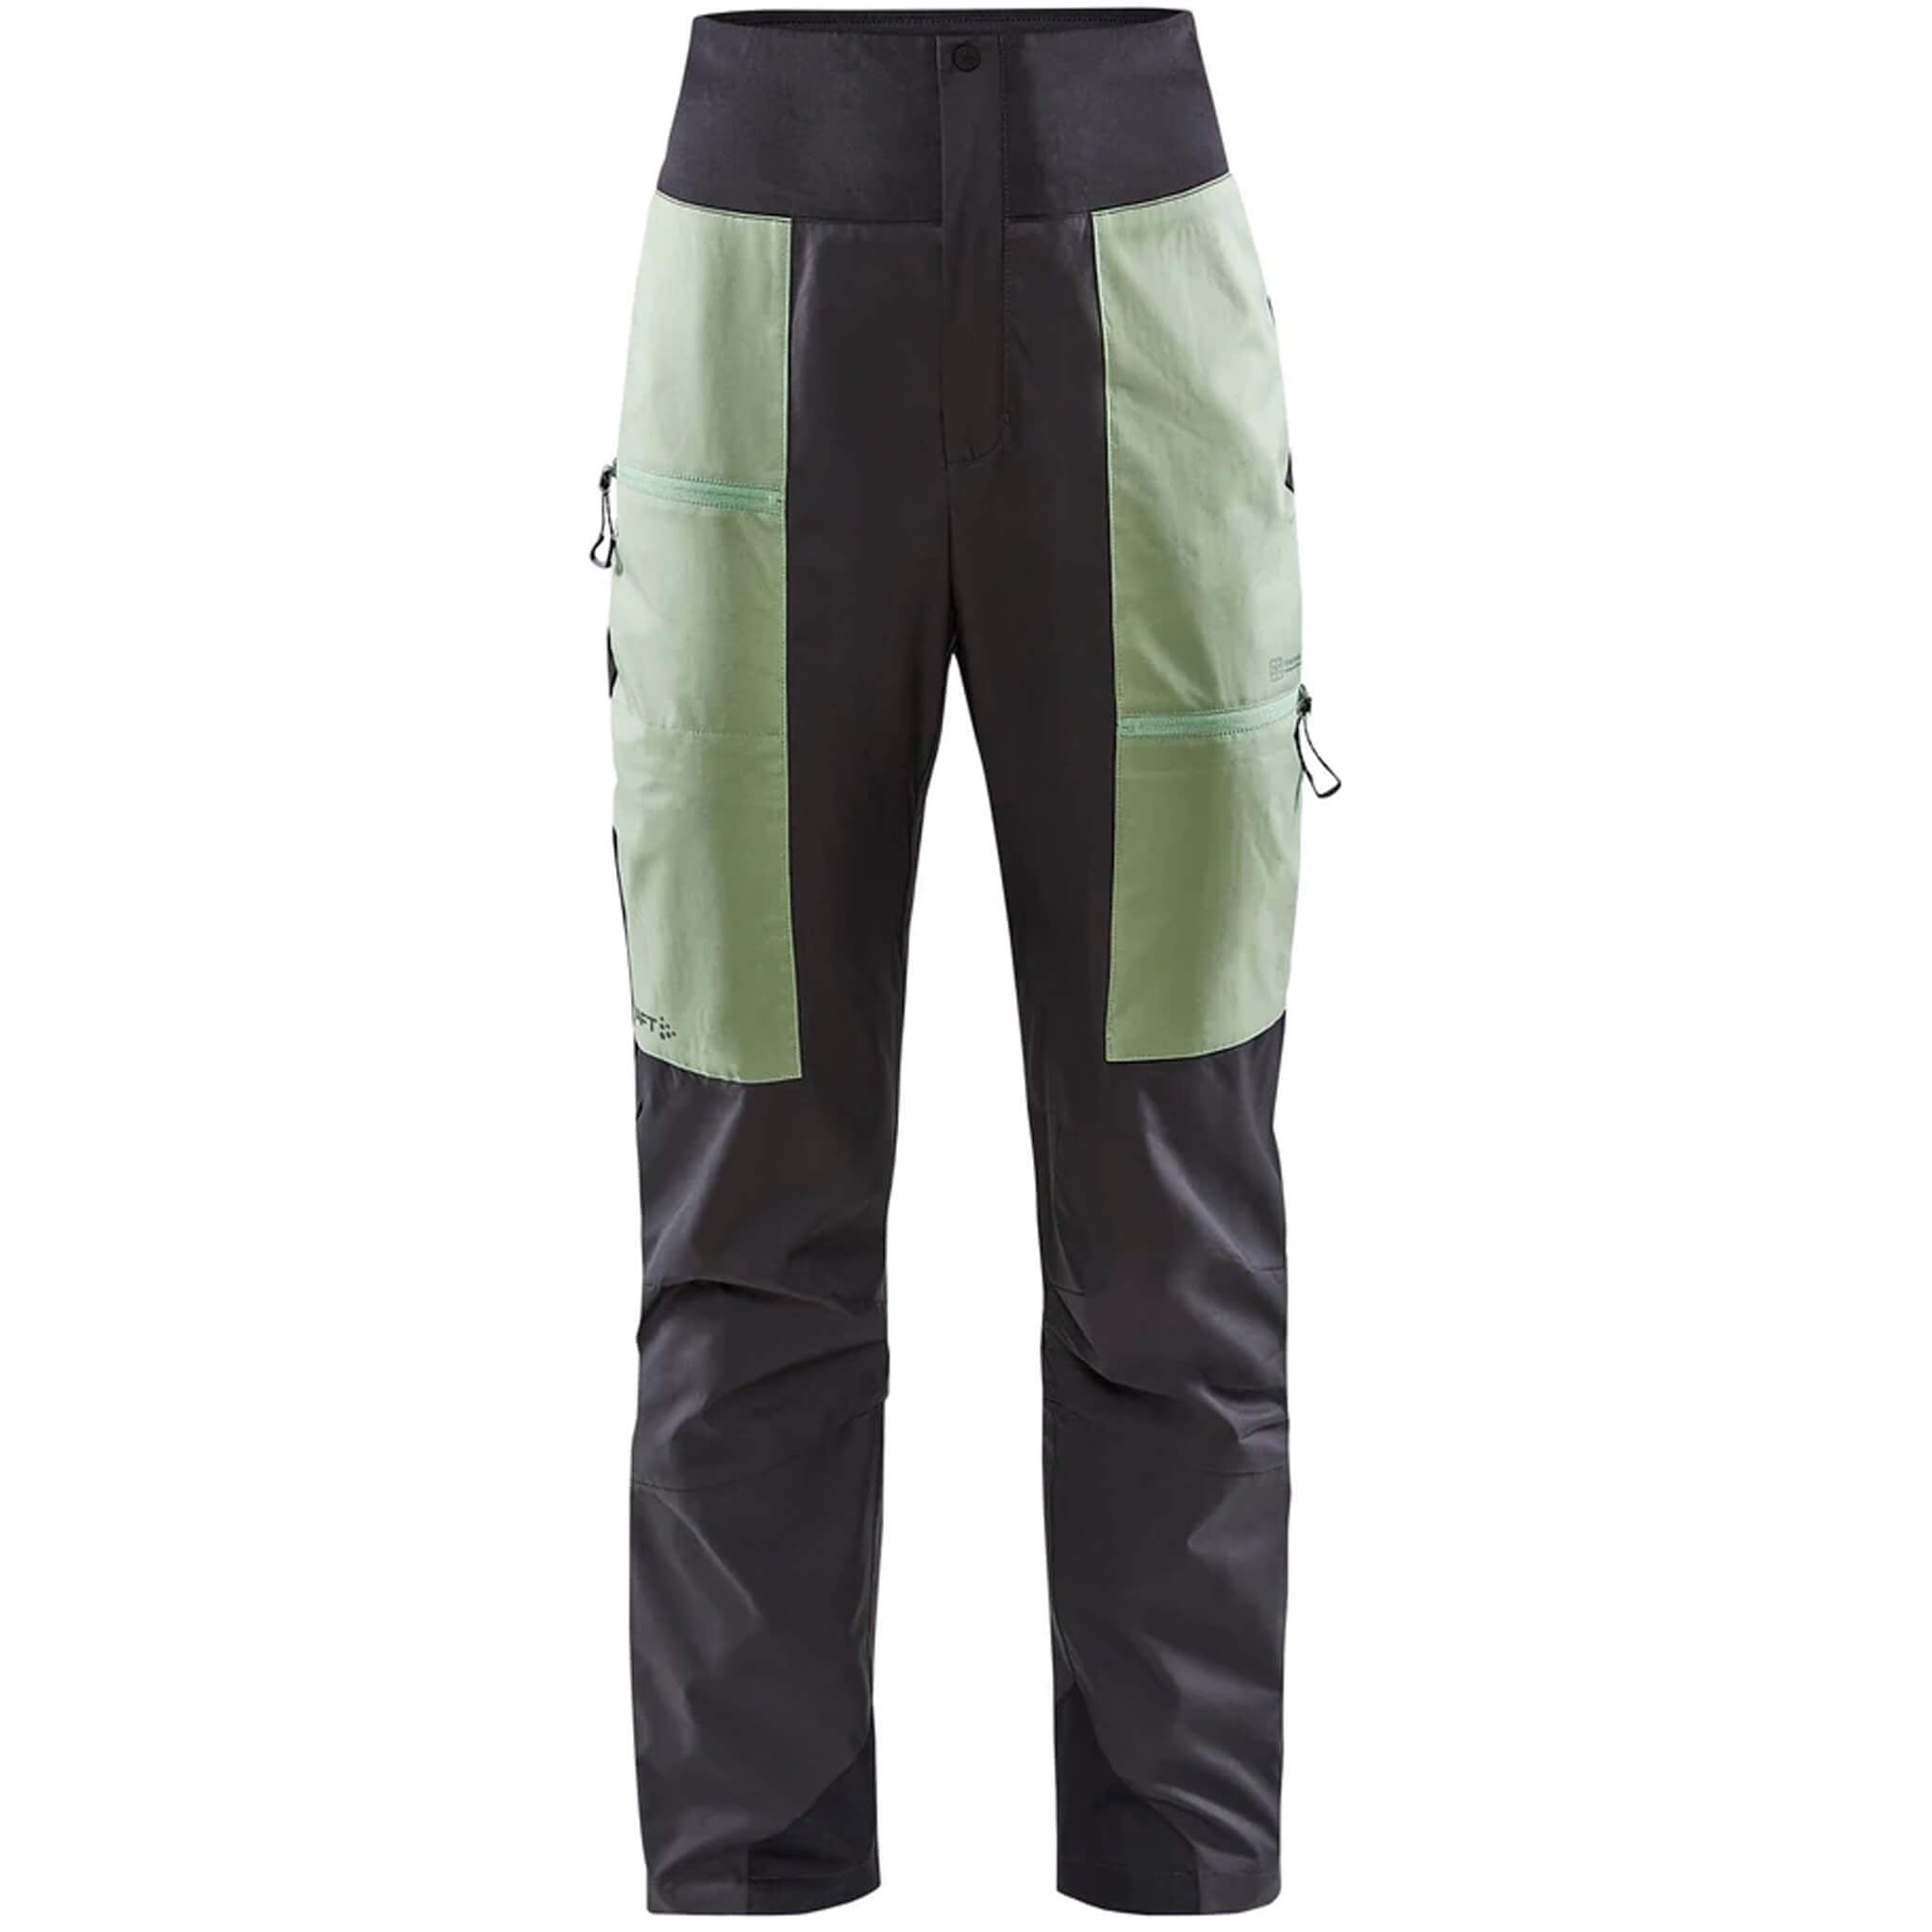 Craft Adv Backcountry Pant W - 0